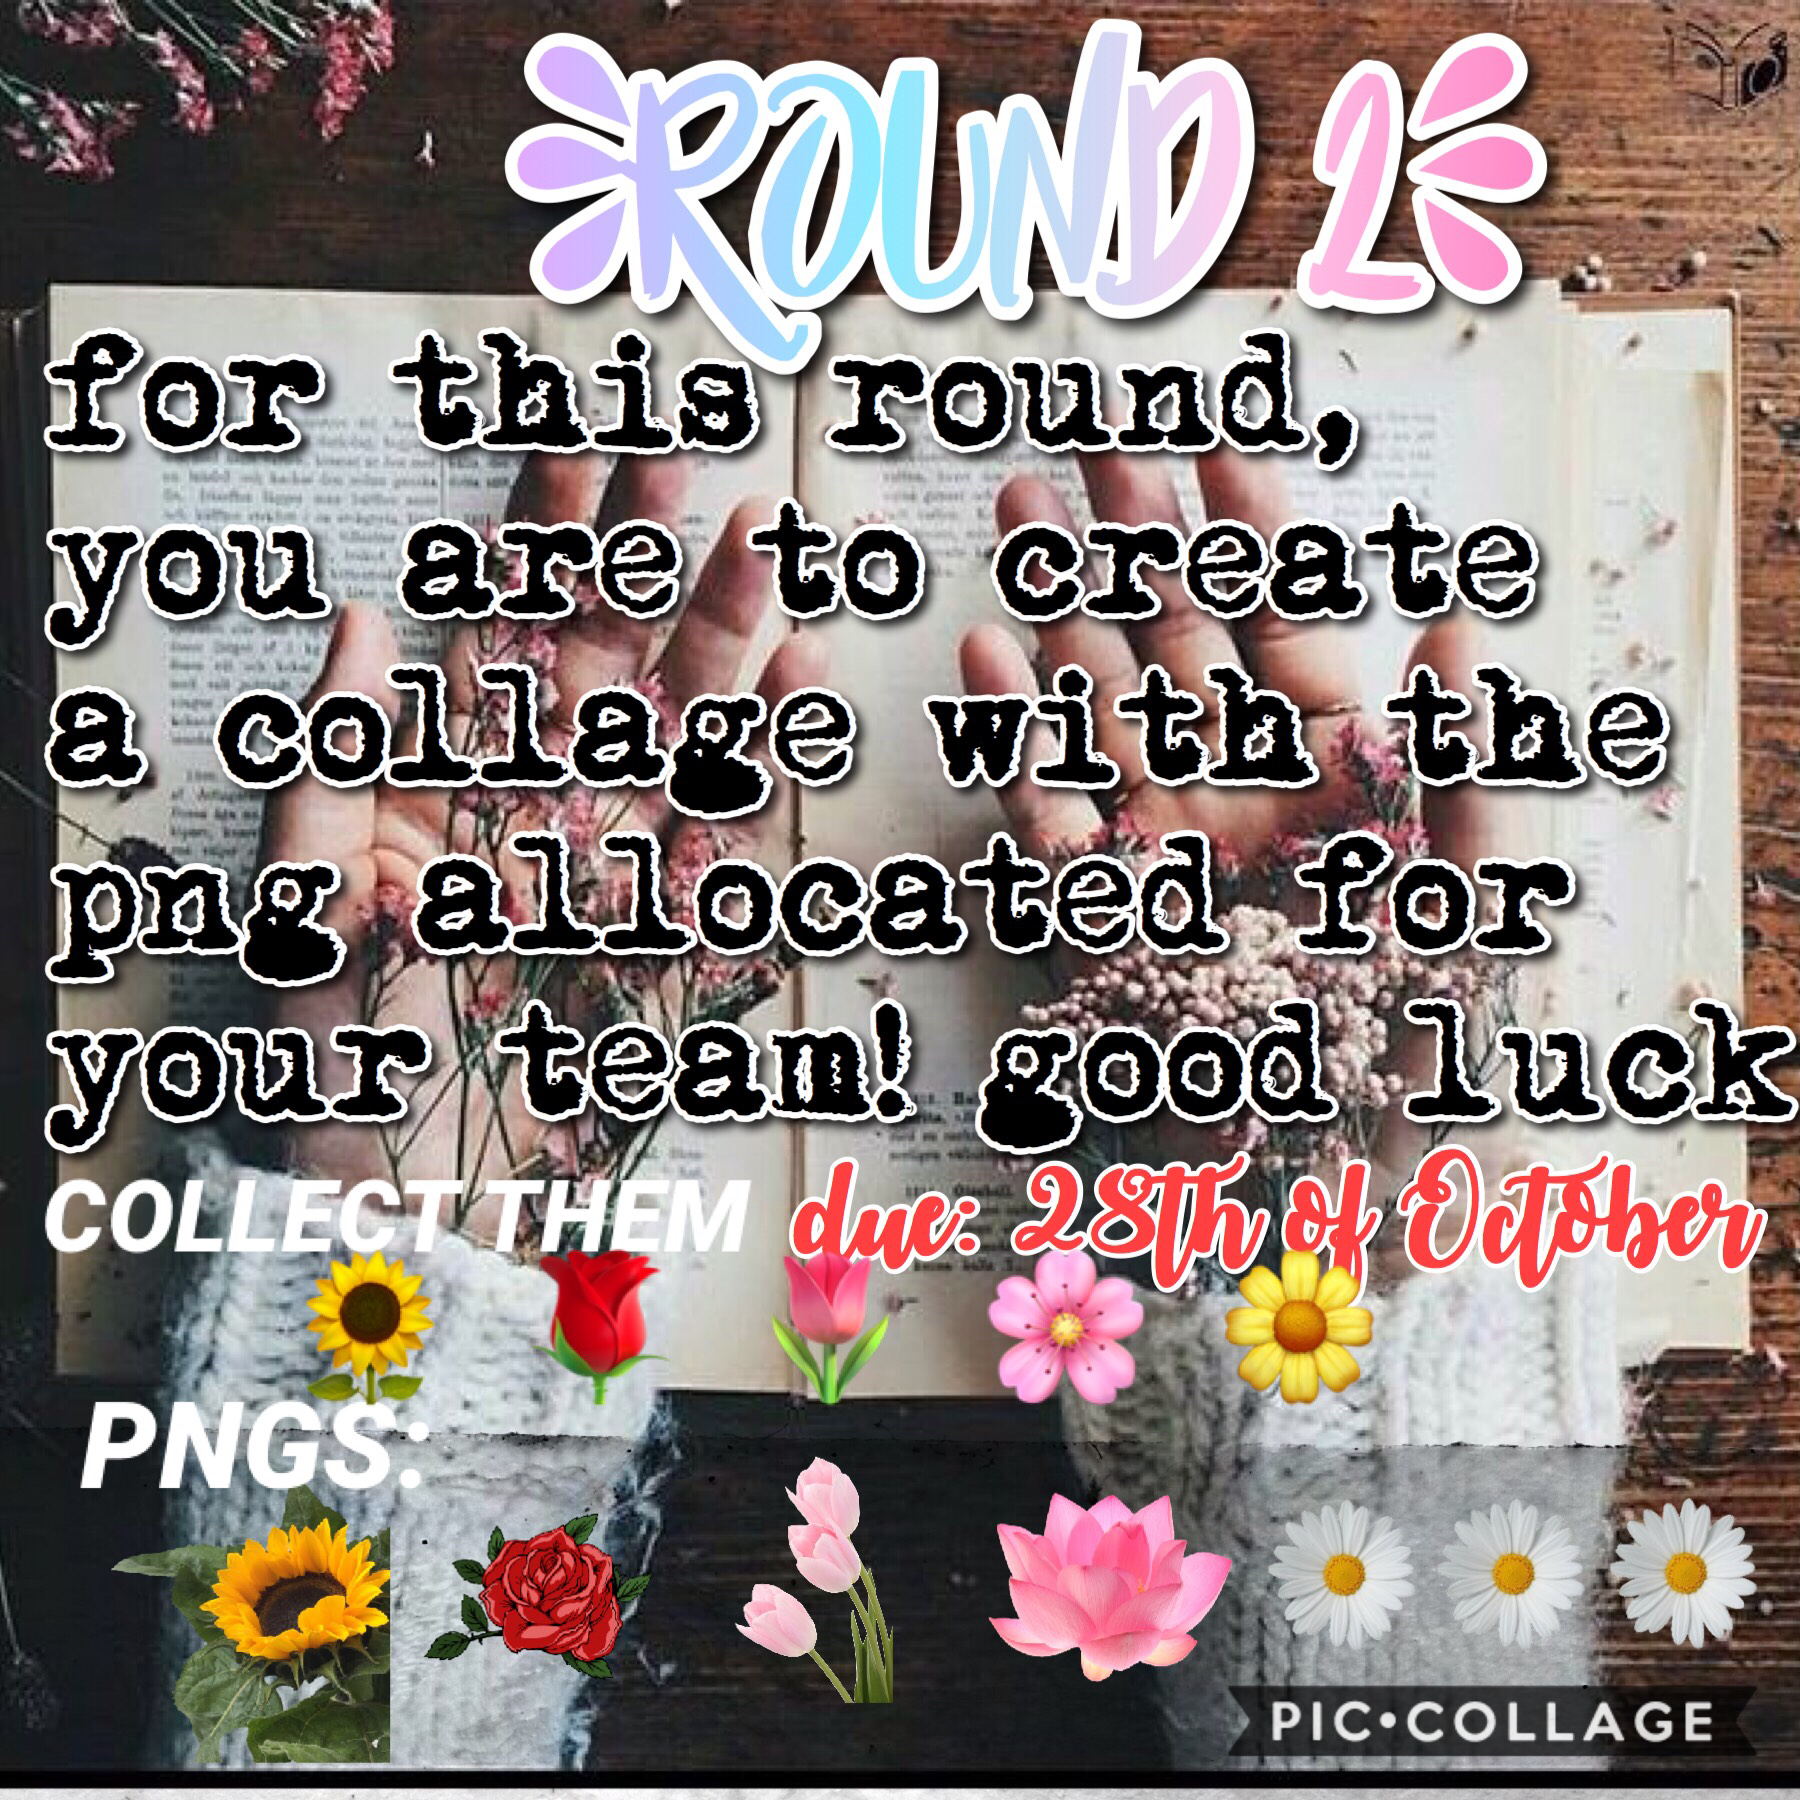 round 2 out now!! pngs are collectable!💘